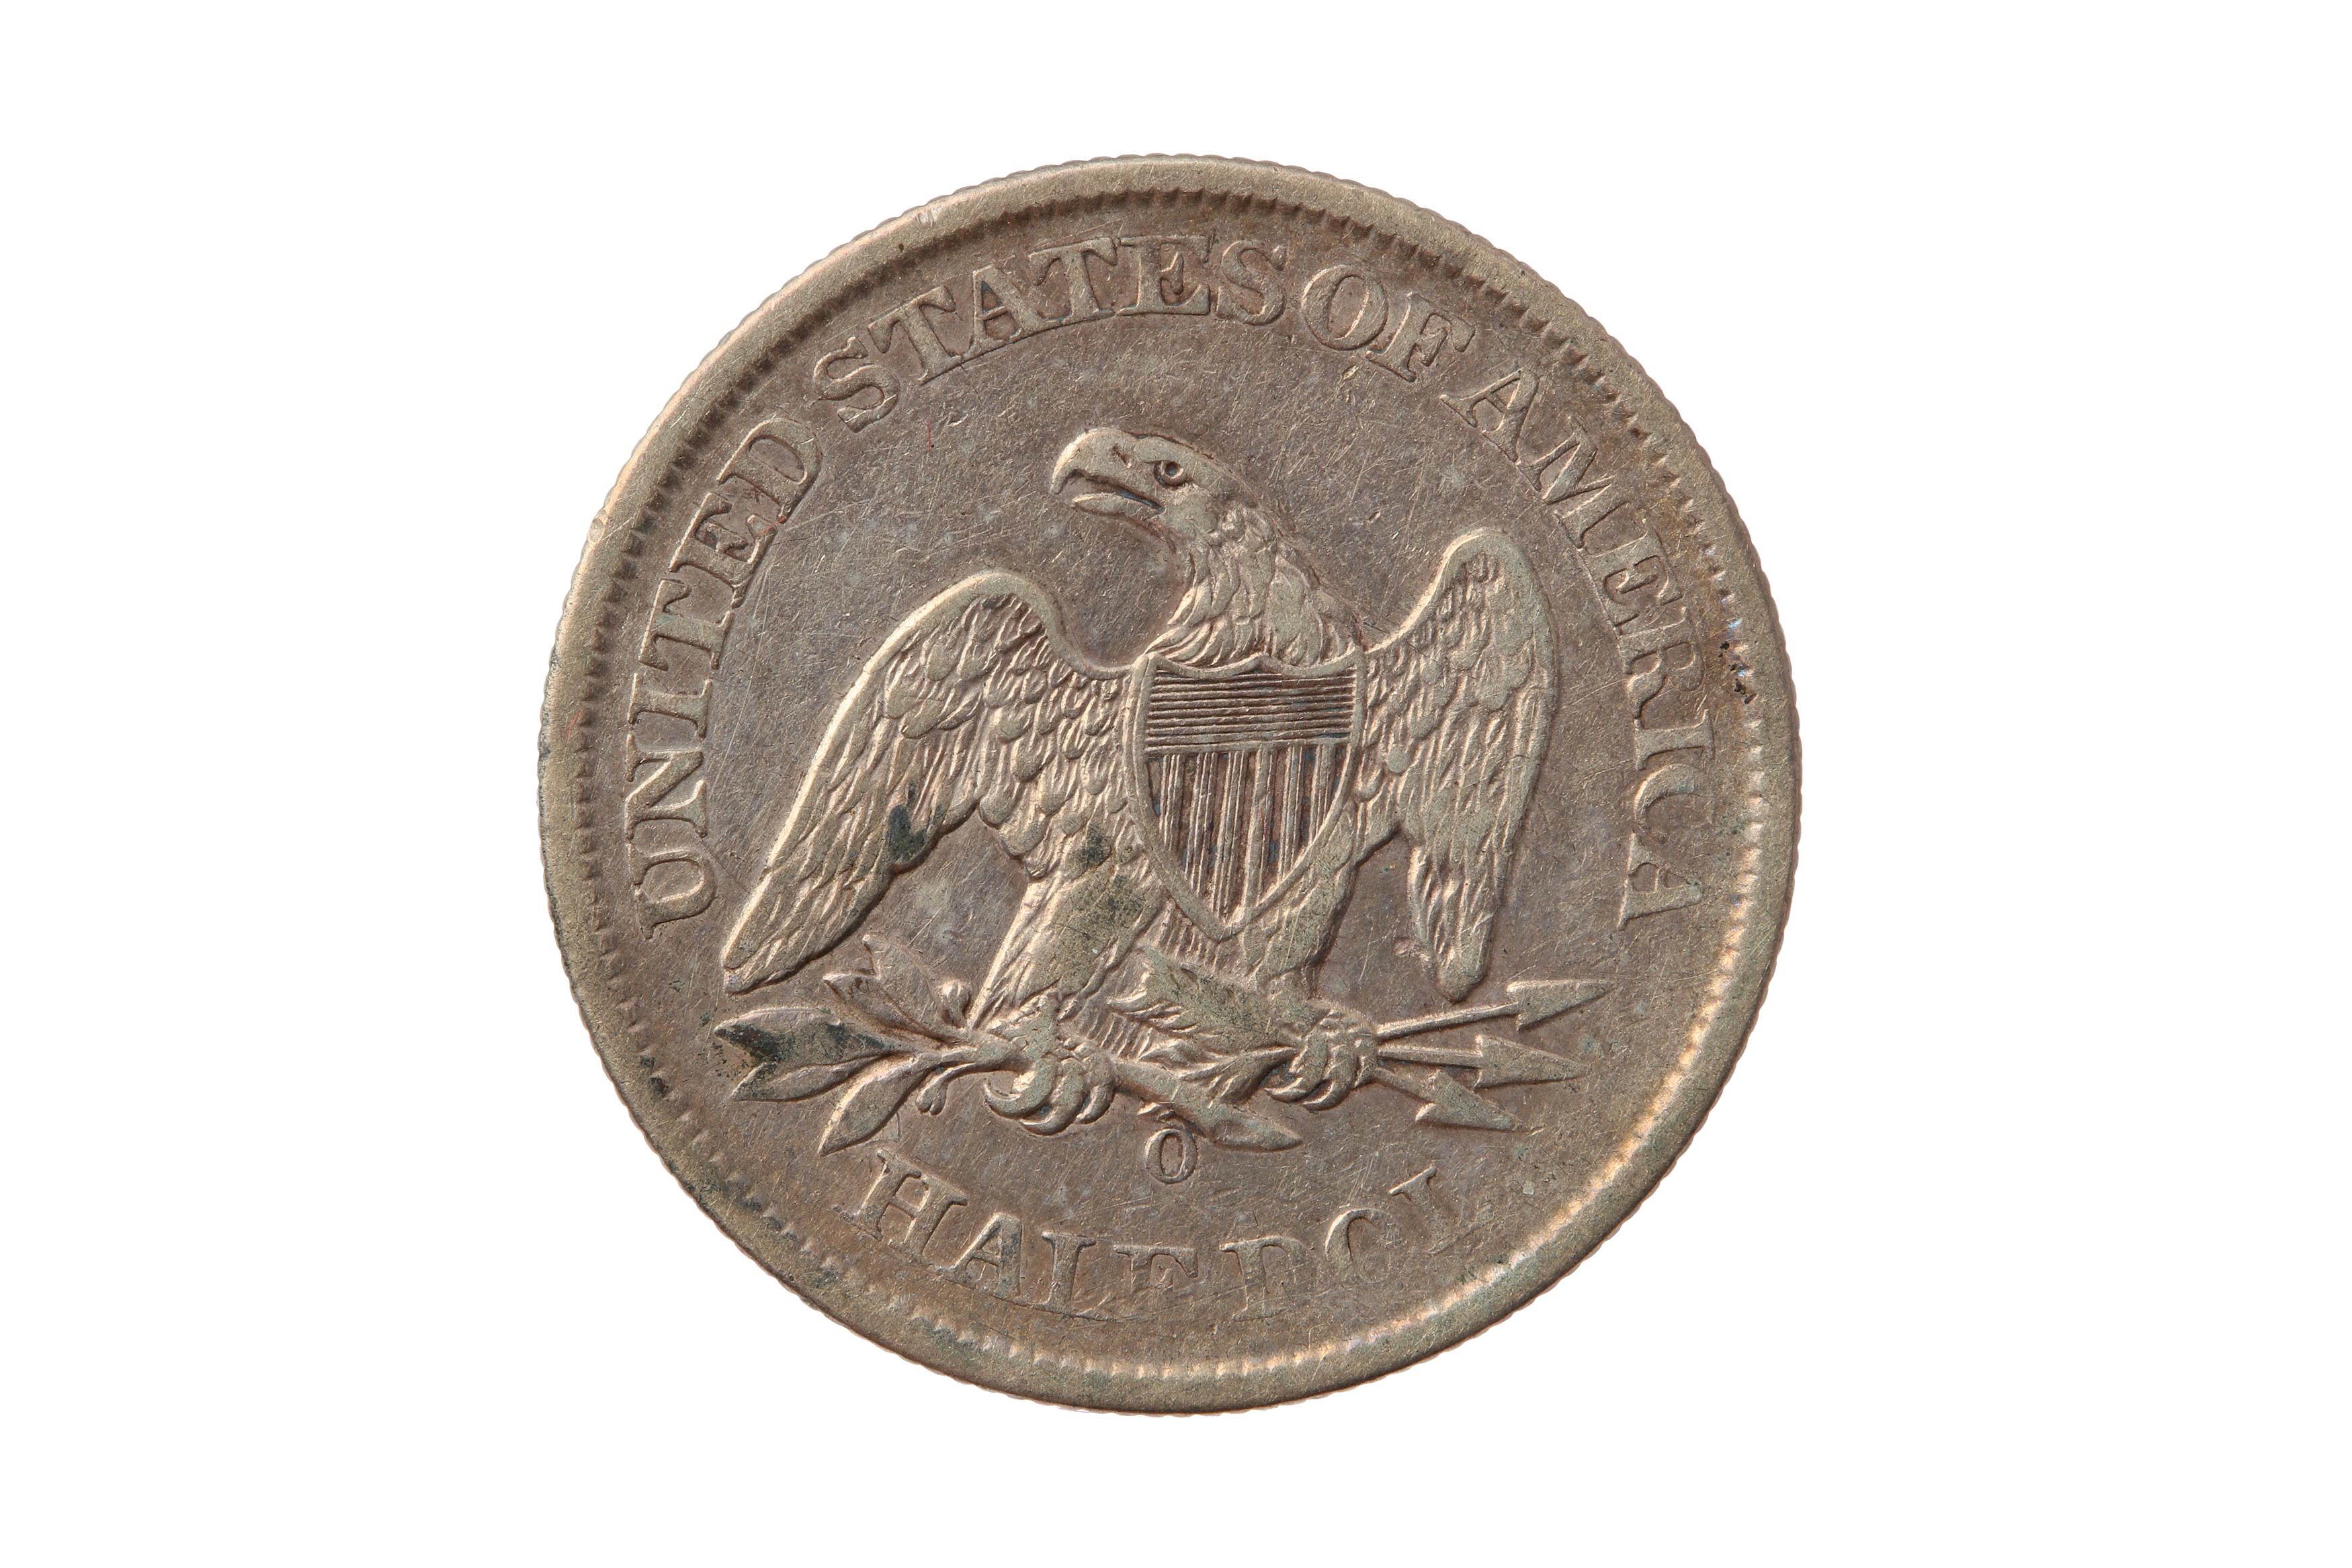 USA, 1861-O 50 CENTS/HALF DOLLAR. CONFEDERATE ISSUE -  BISECTED DATE, WB-103. - Bild 2 aus 2